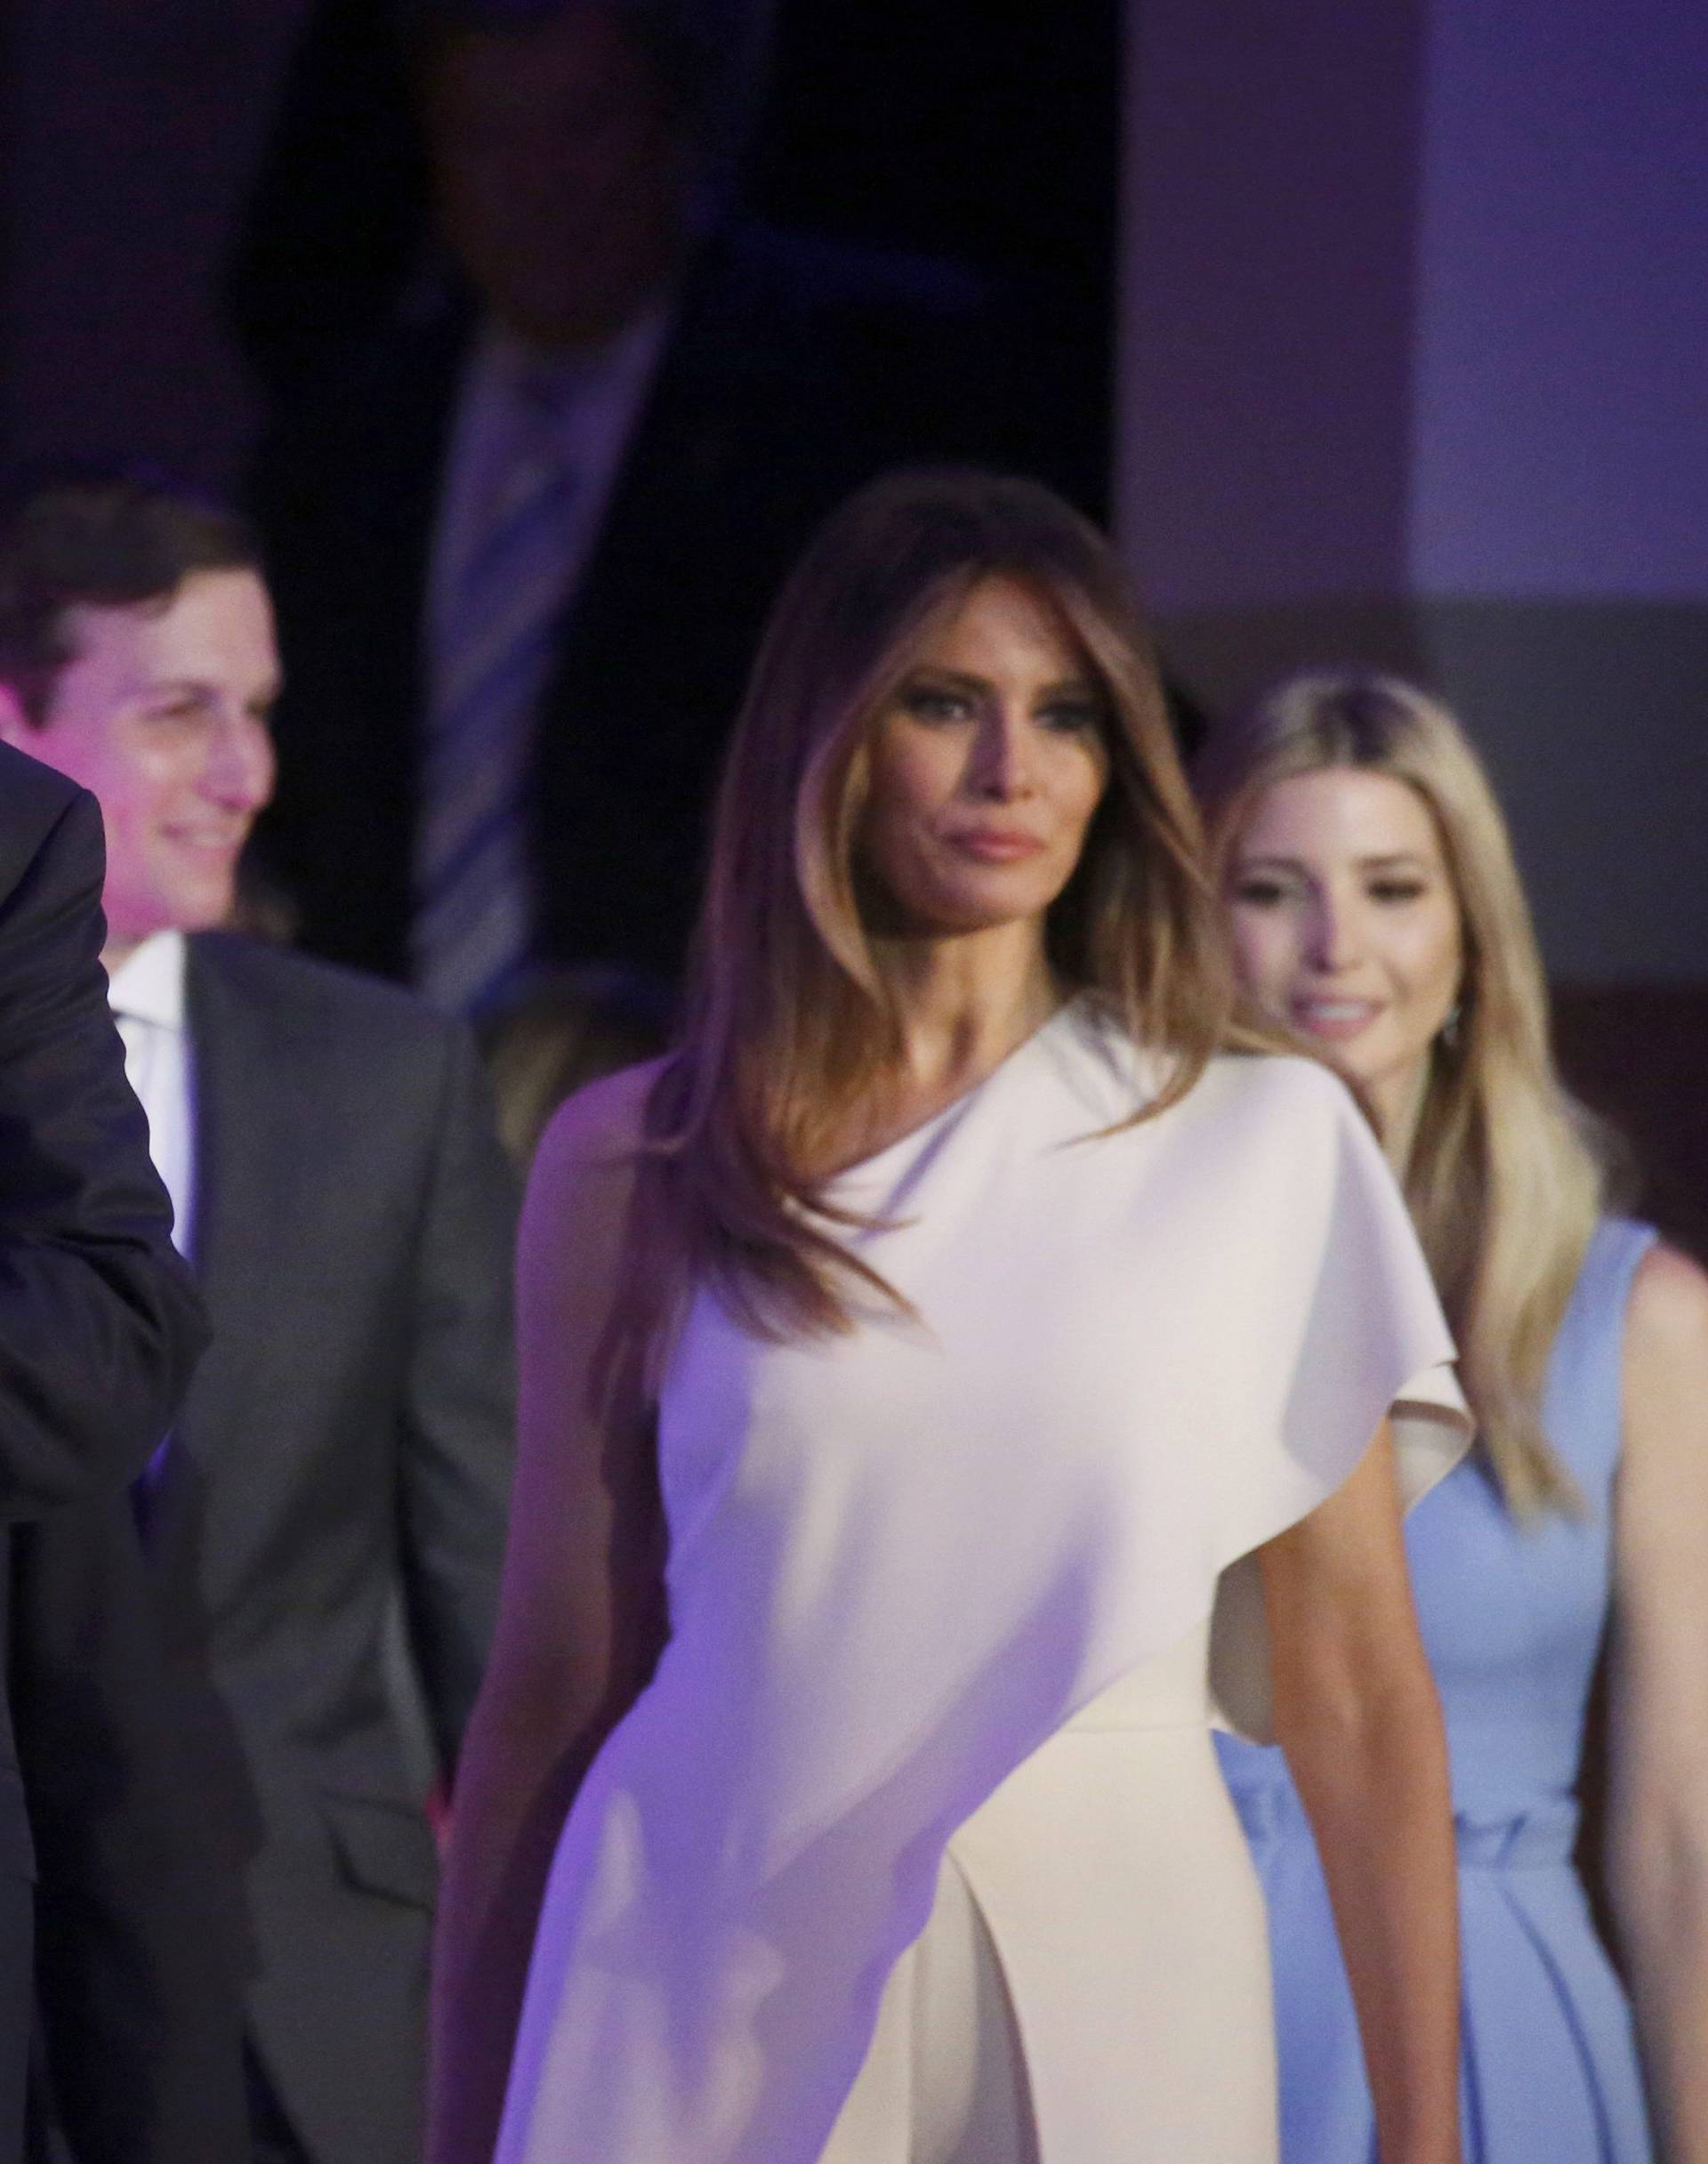 Republican U.S. president-elect Donald Trump stands wife Melania and family at his election night rally in Manhattan, New York